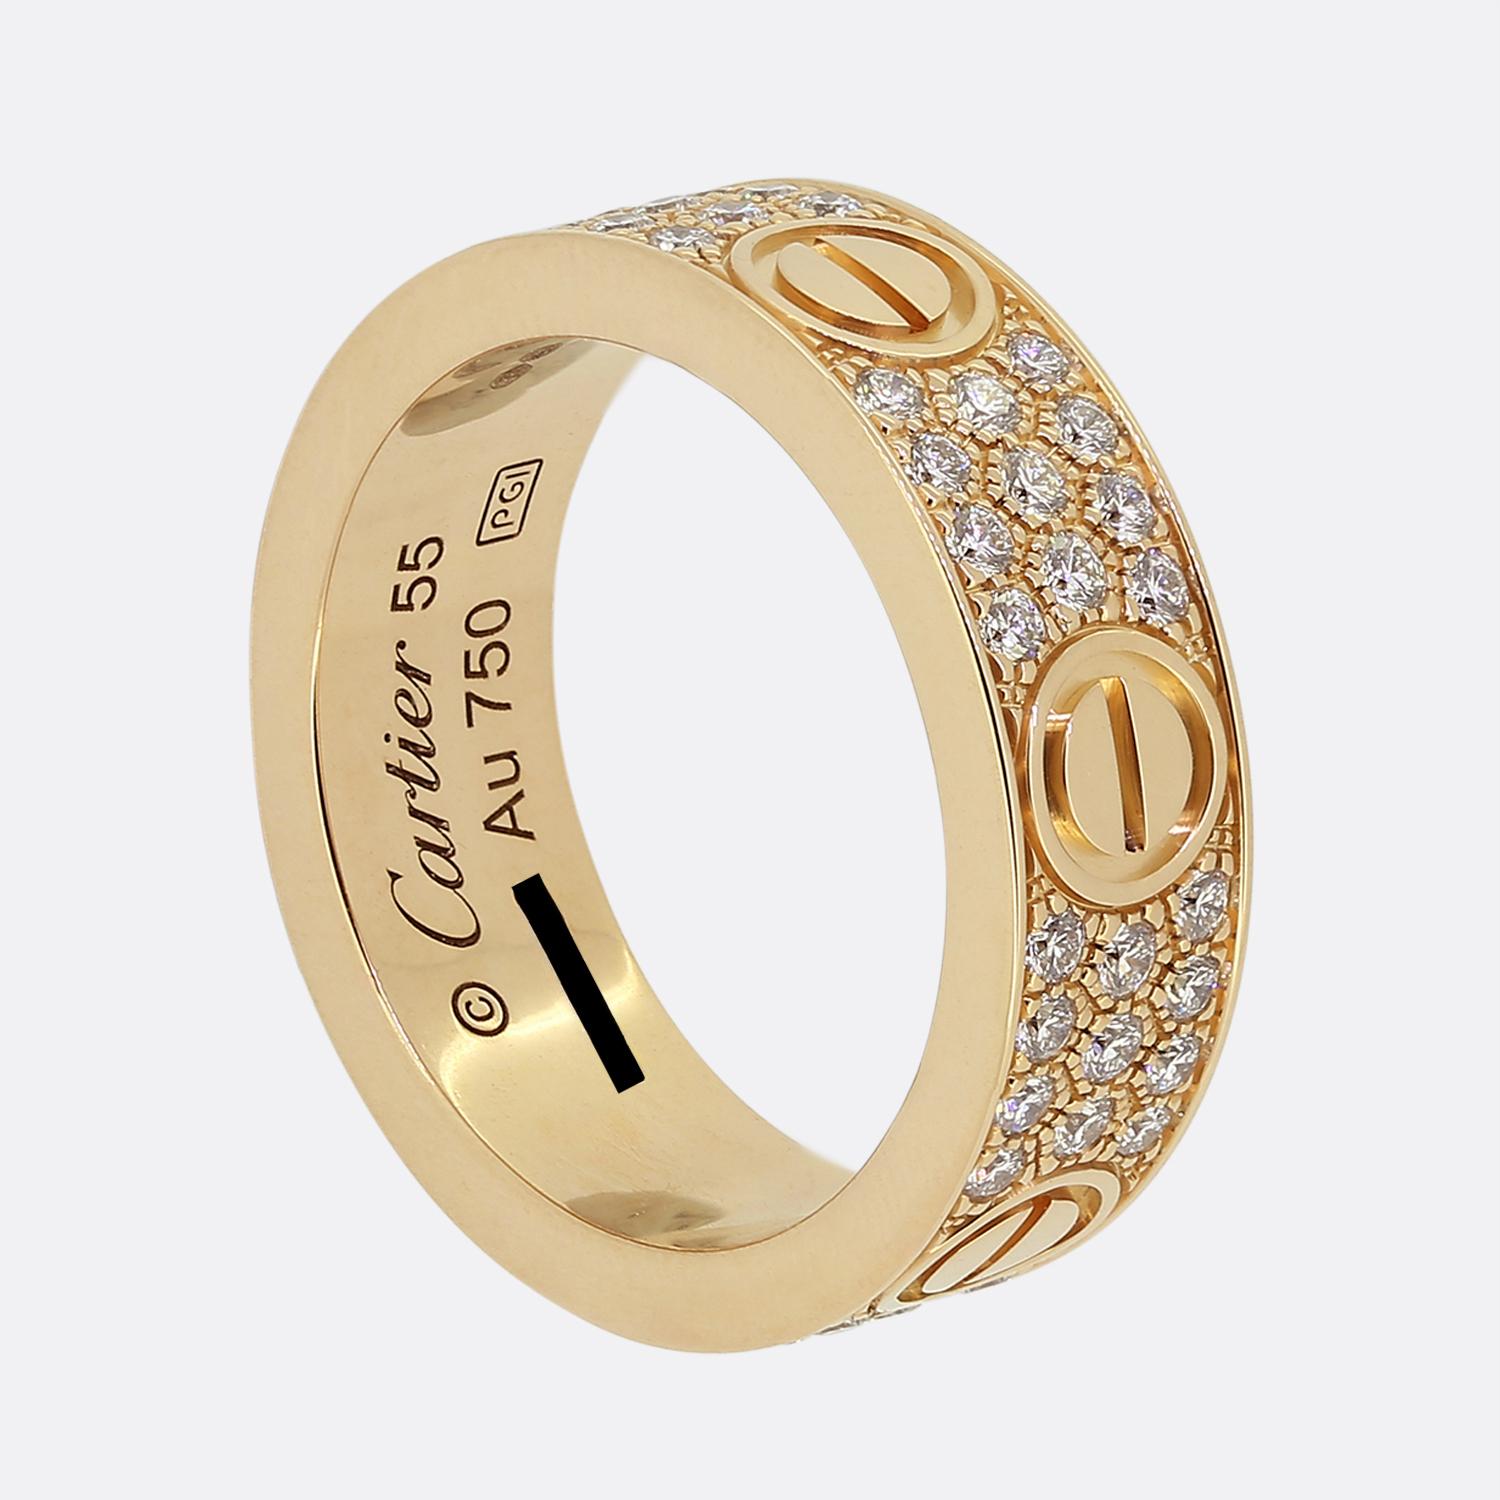 Here we have an 18ct rose gold band ring from the world renowned luxury jewellery house of Cartier. This ring forms part of their LOVE collection and showcases a consistent alternating design around the entire band featuring three diamond set rows